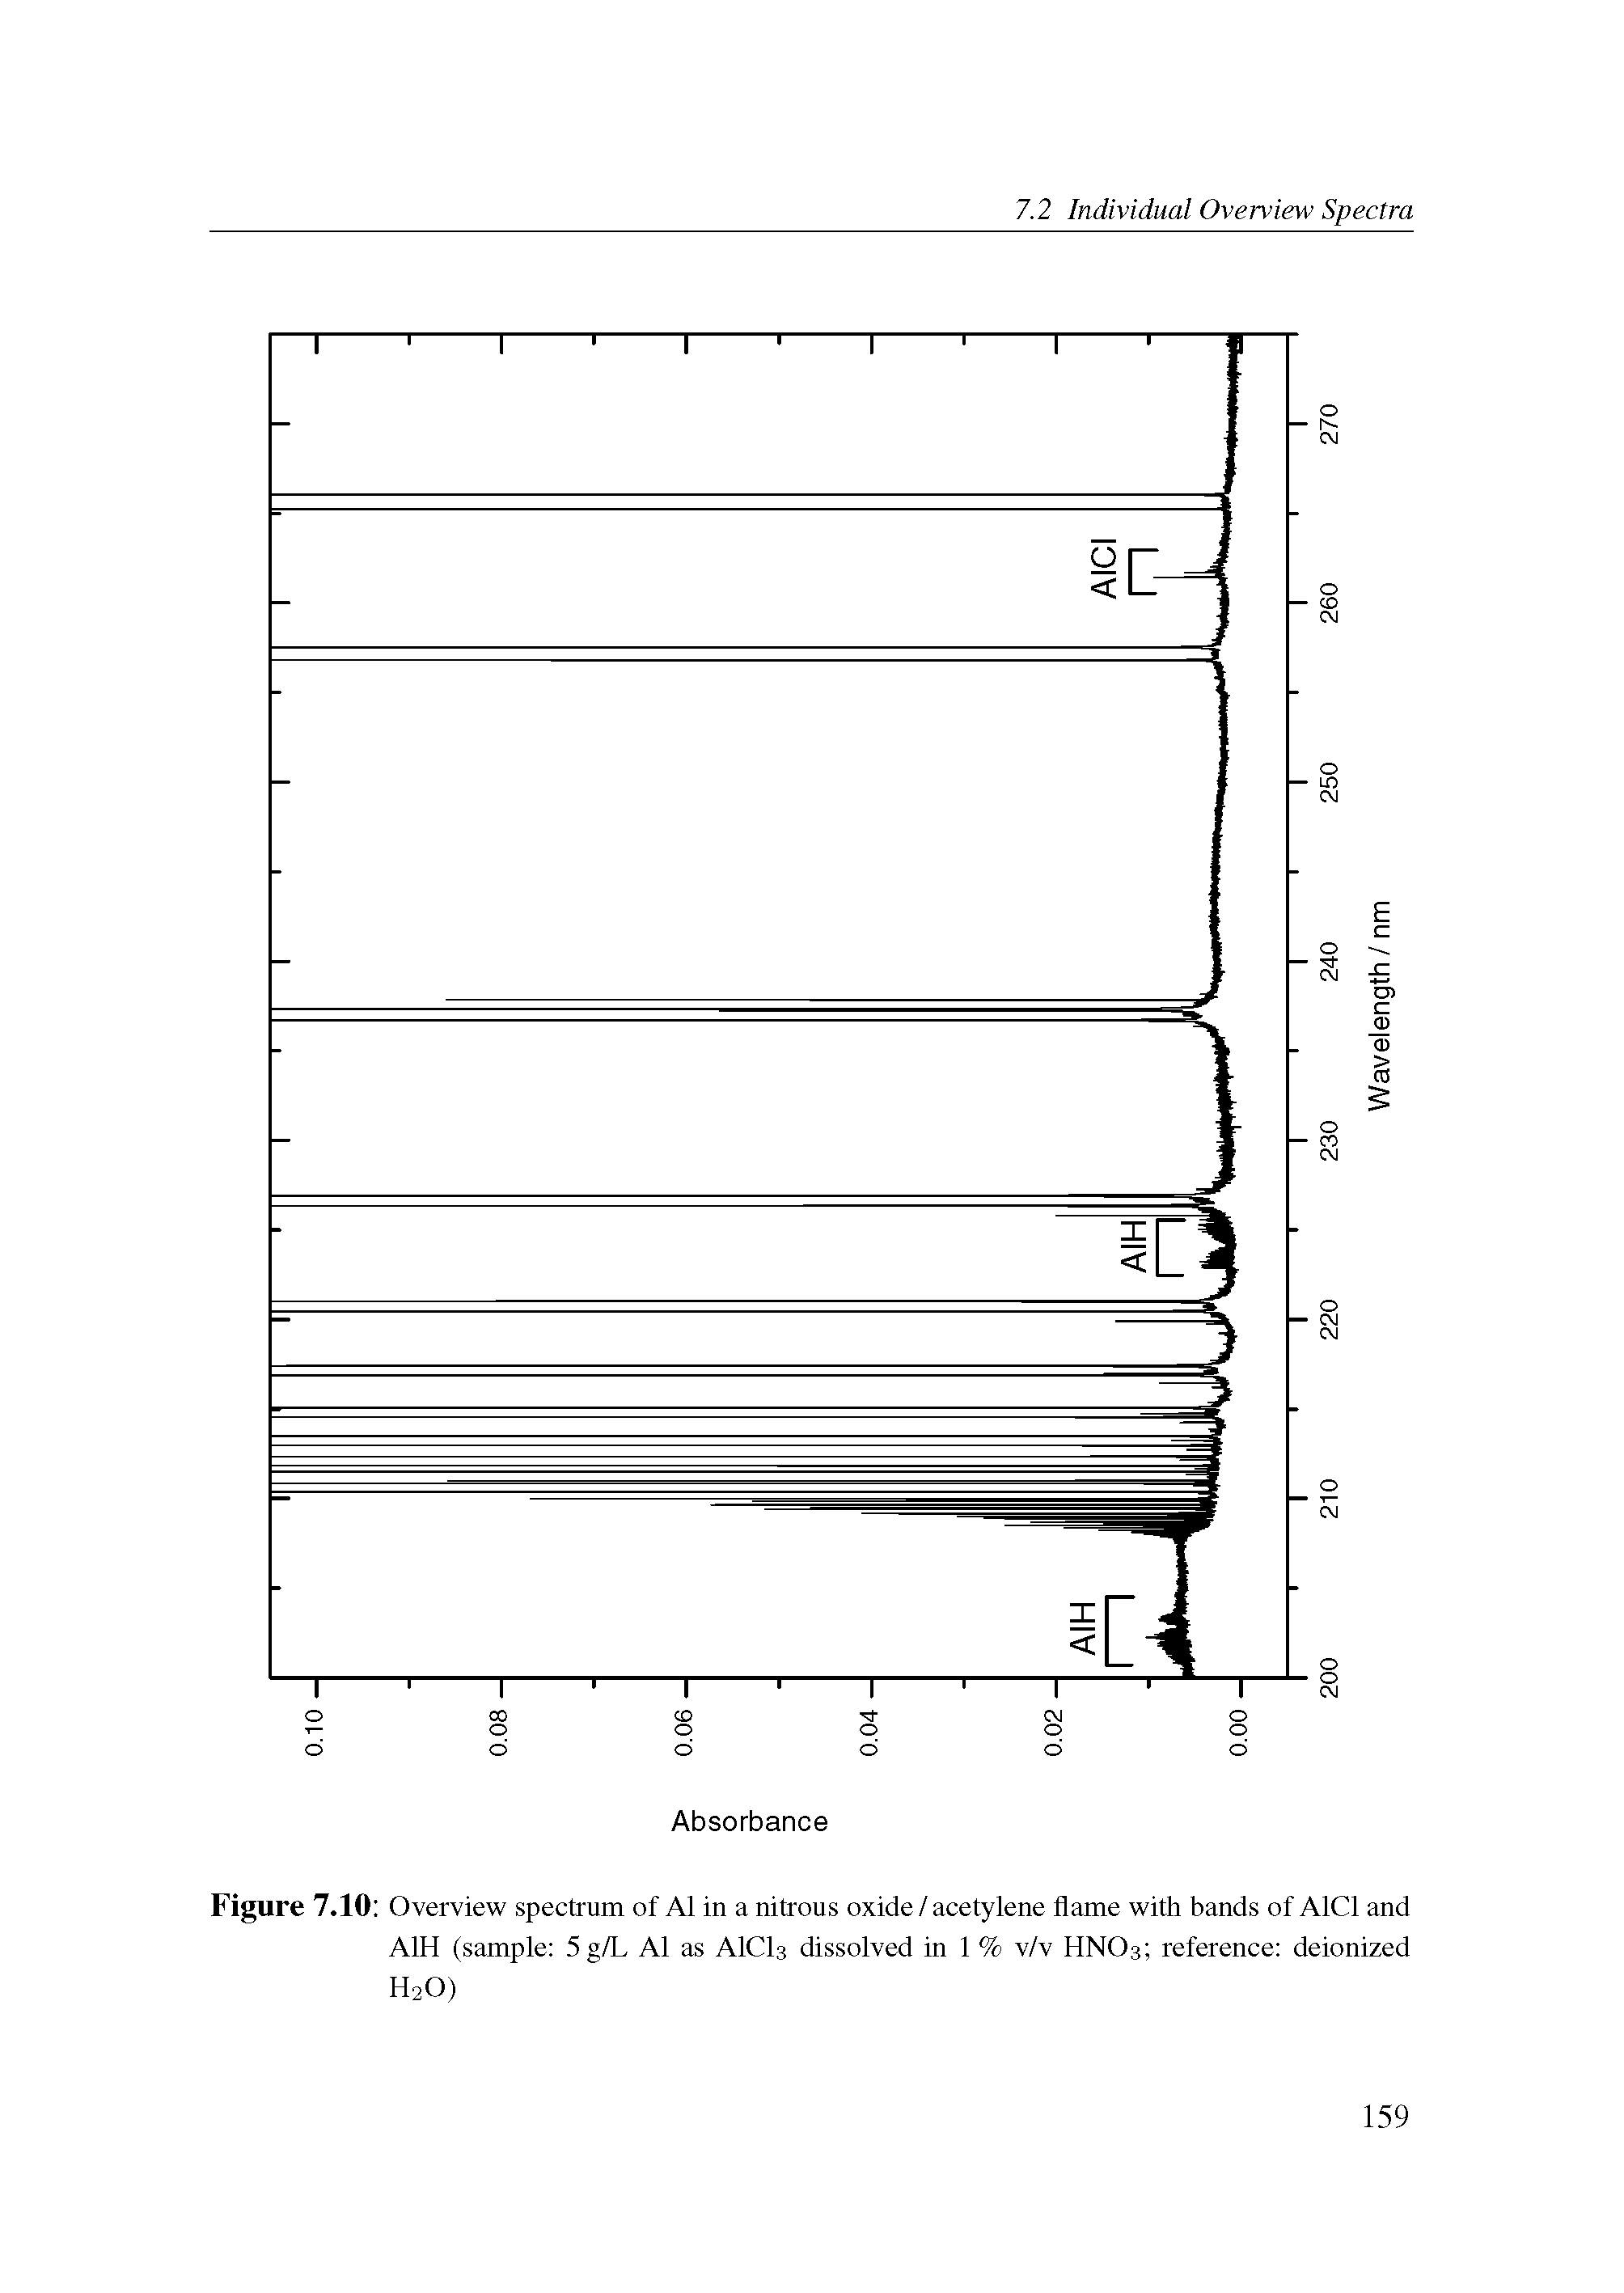 Figure 7.10 Overview spectrum of A1 in a nitrous oxide / acetylene flame with bands of AlCl and AlH (sample 5g/L A1 as AICI3 dissolved in 1 % v/v HNO3 reference deionized H2O)...